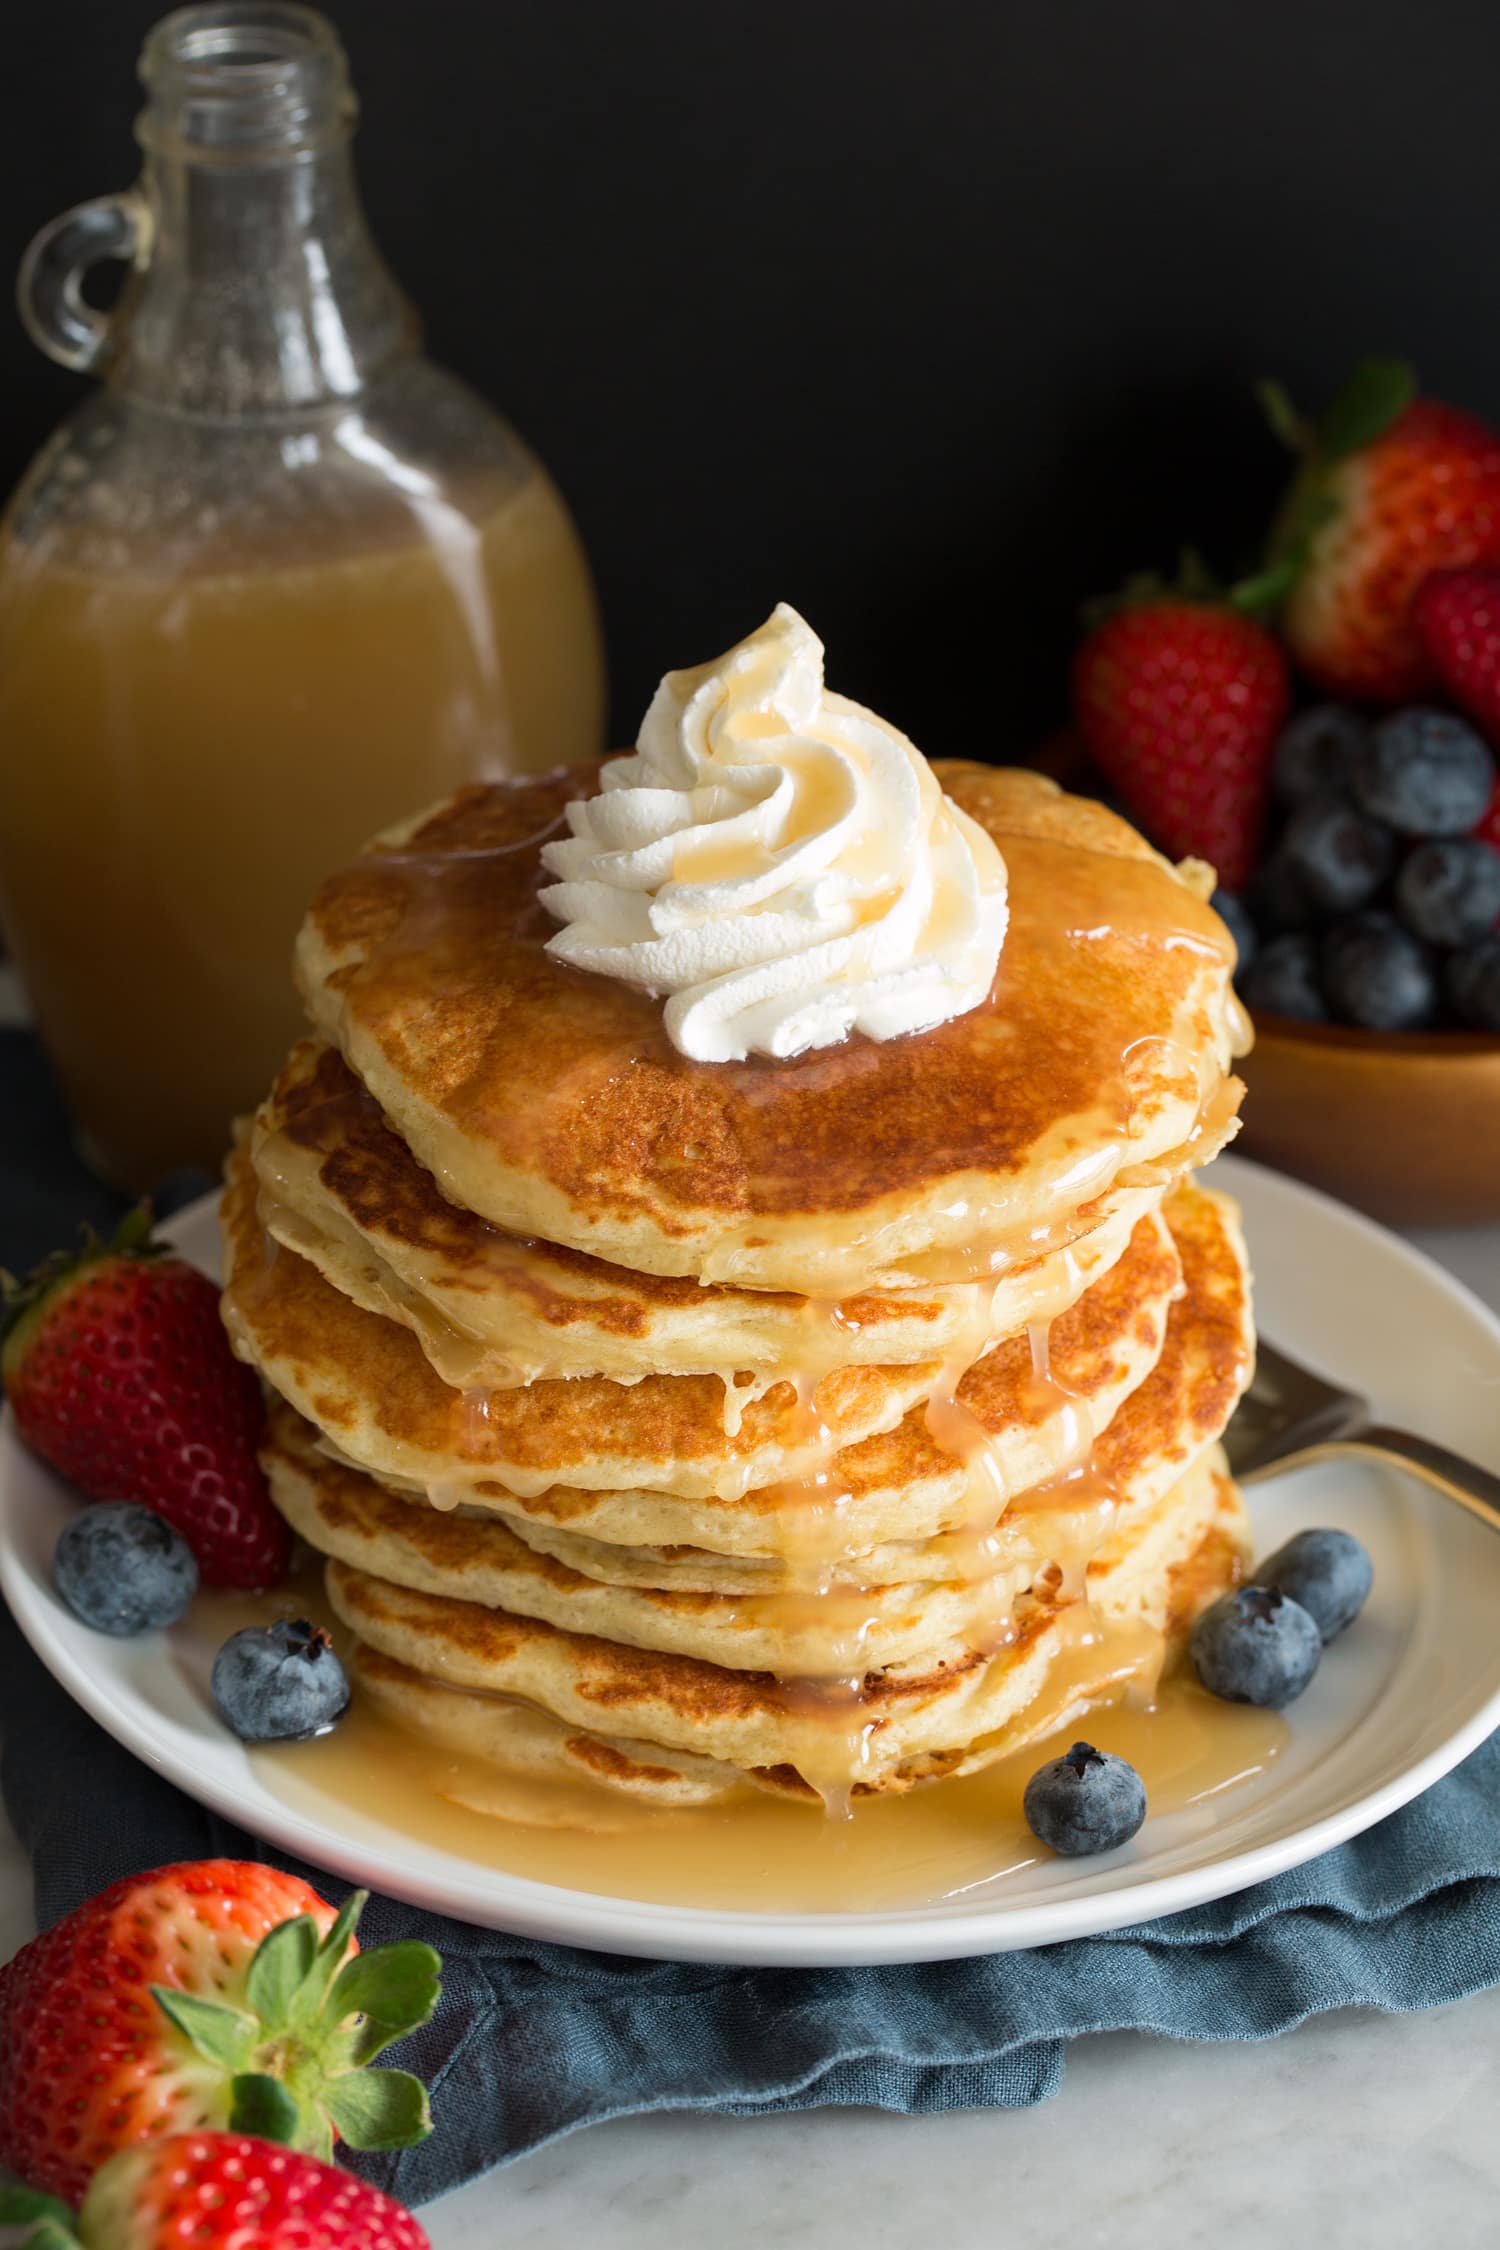 Homemade vanilla buttermilk syrup over pancakes with fresh fruit.